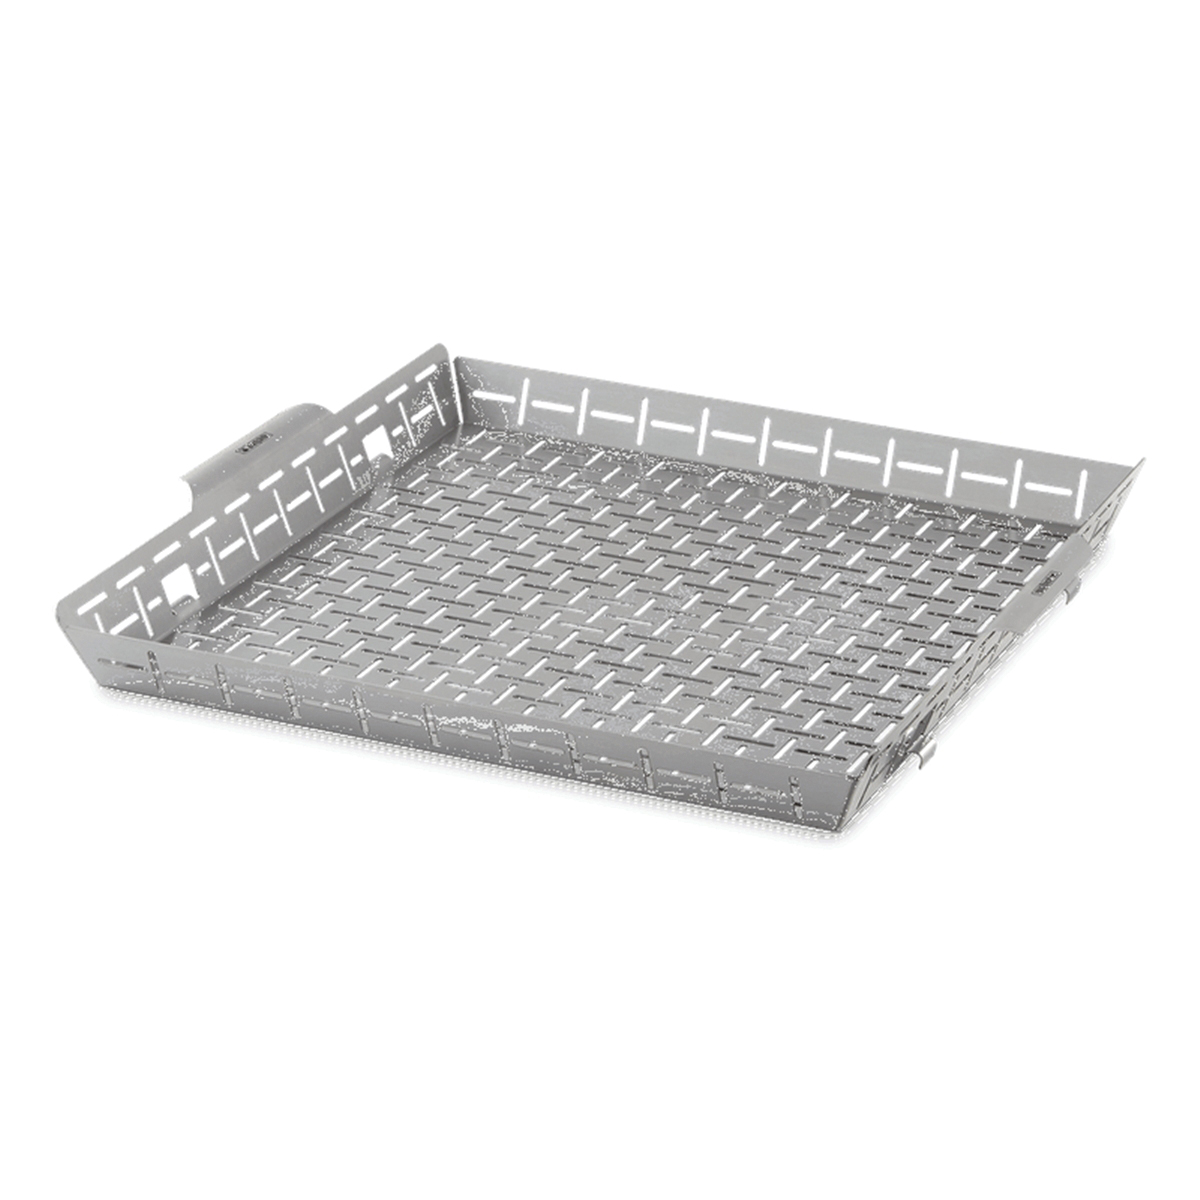 Crafted Series 7673 Roasting Basket, 16.3 in L, 17.2 in W, Stainless Steel